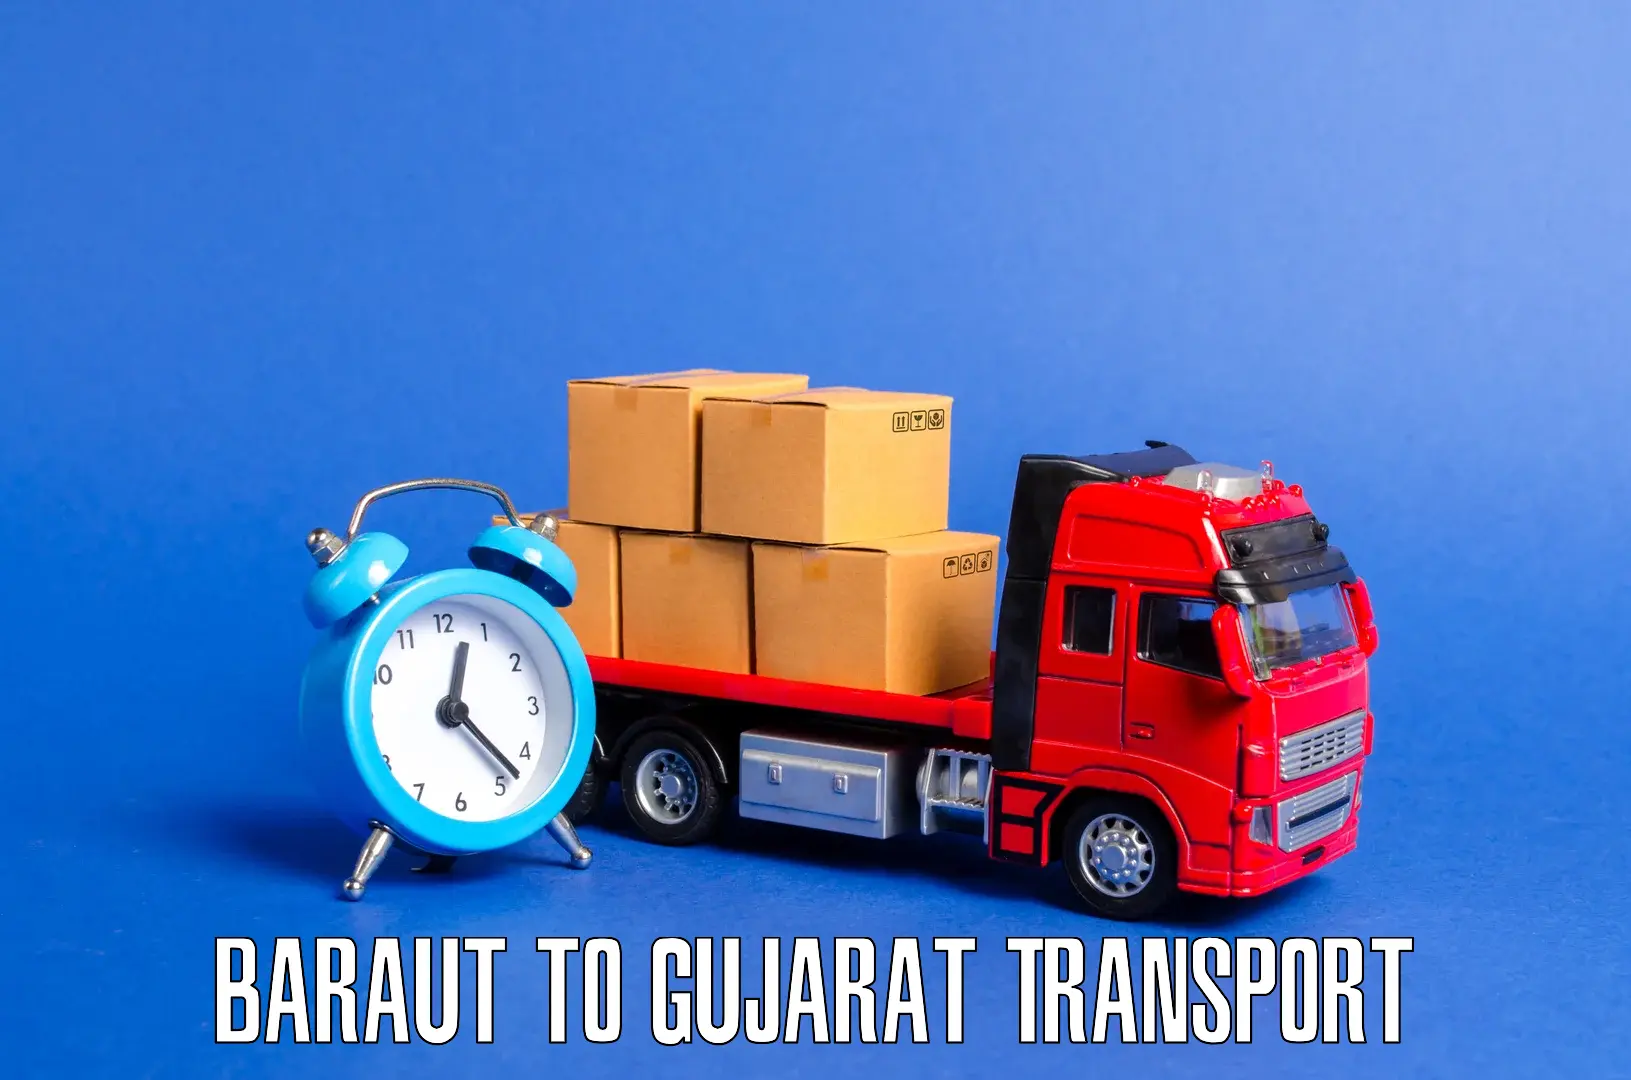 Nearby transport service Baraut to Surat